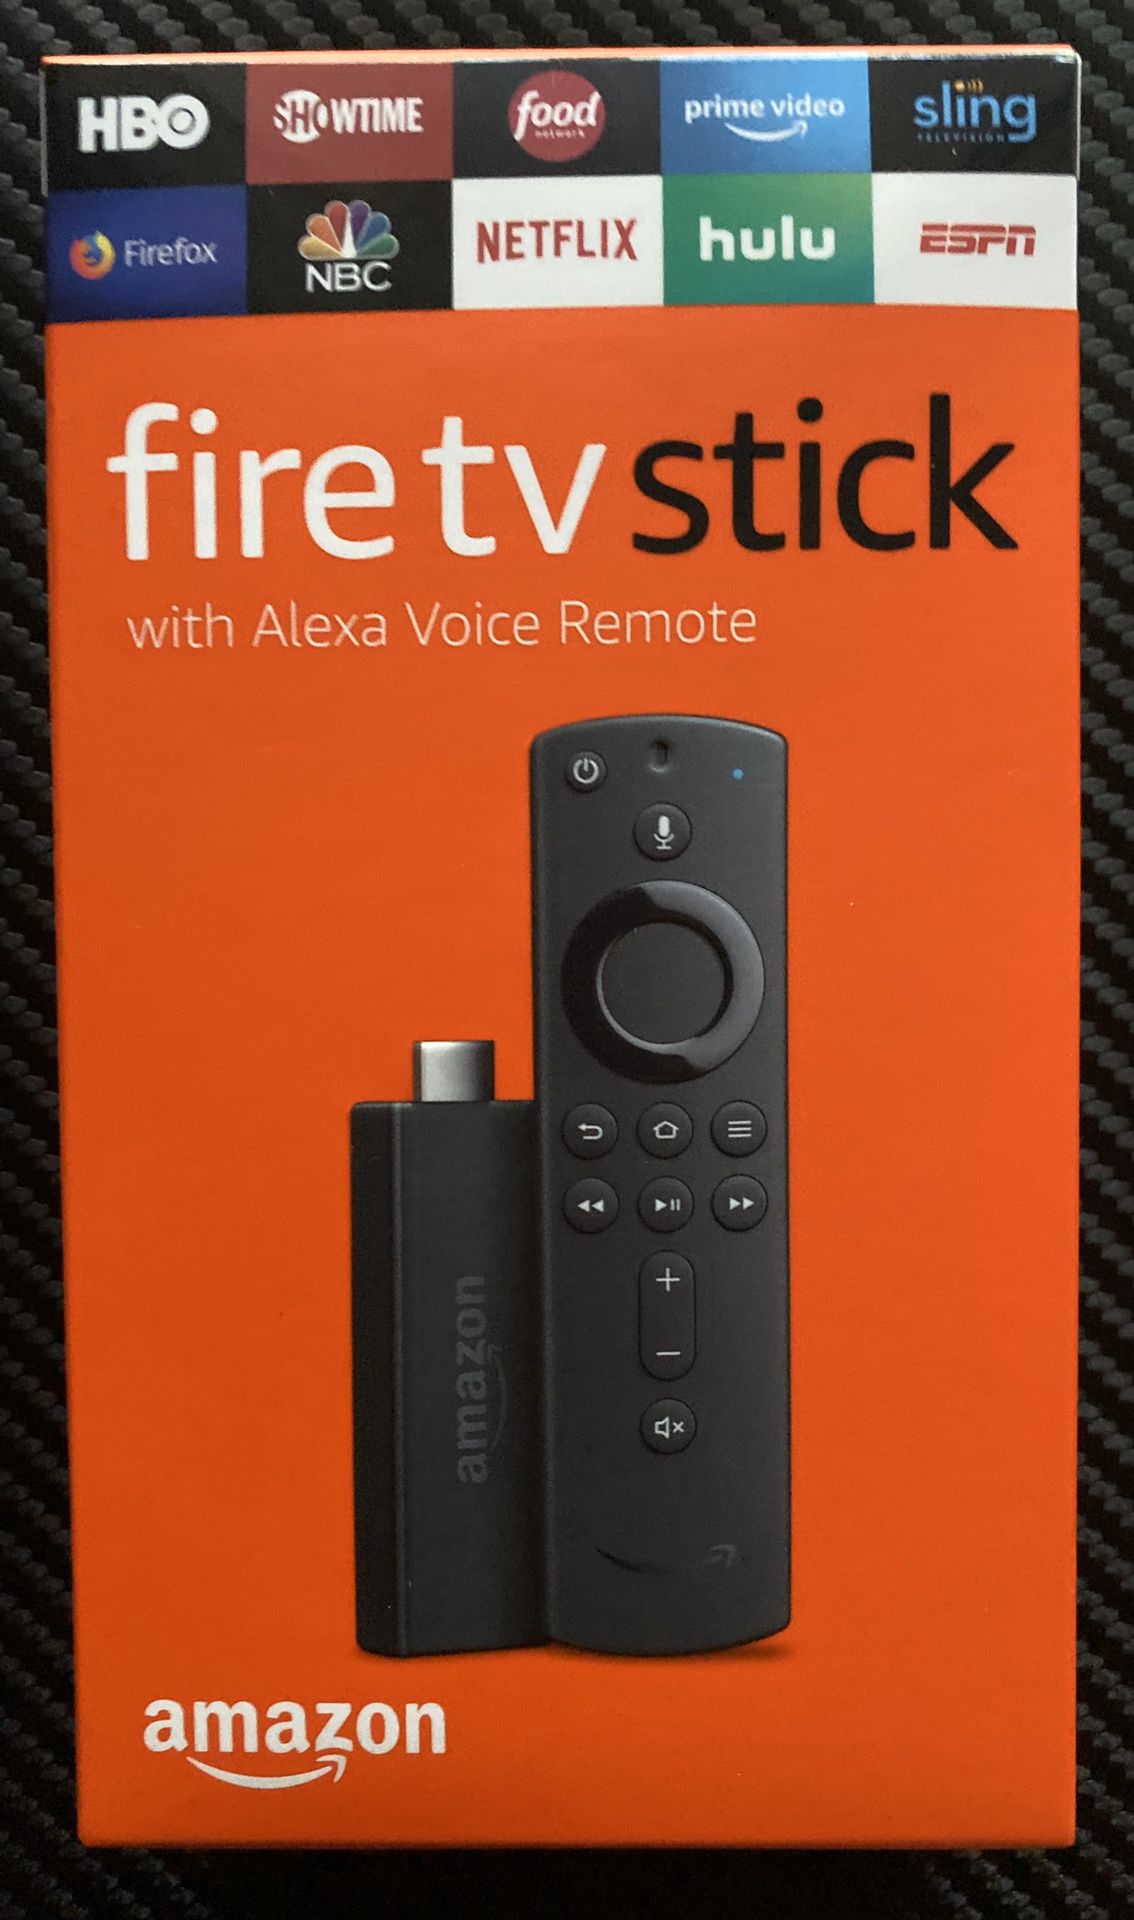 New Amazon fire tv stick with free live tv, movies and tv shows